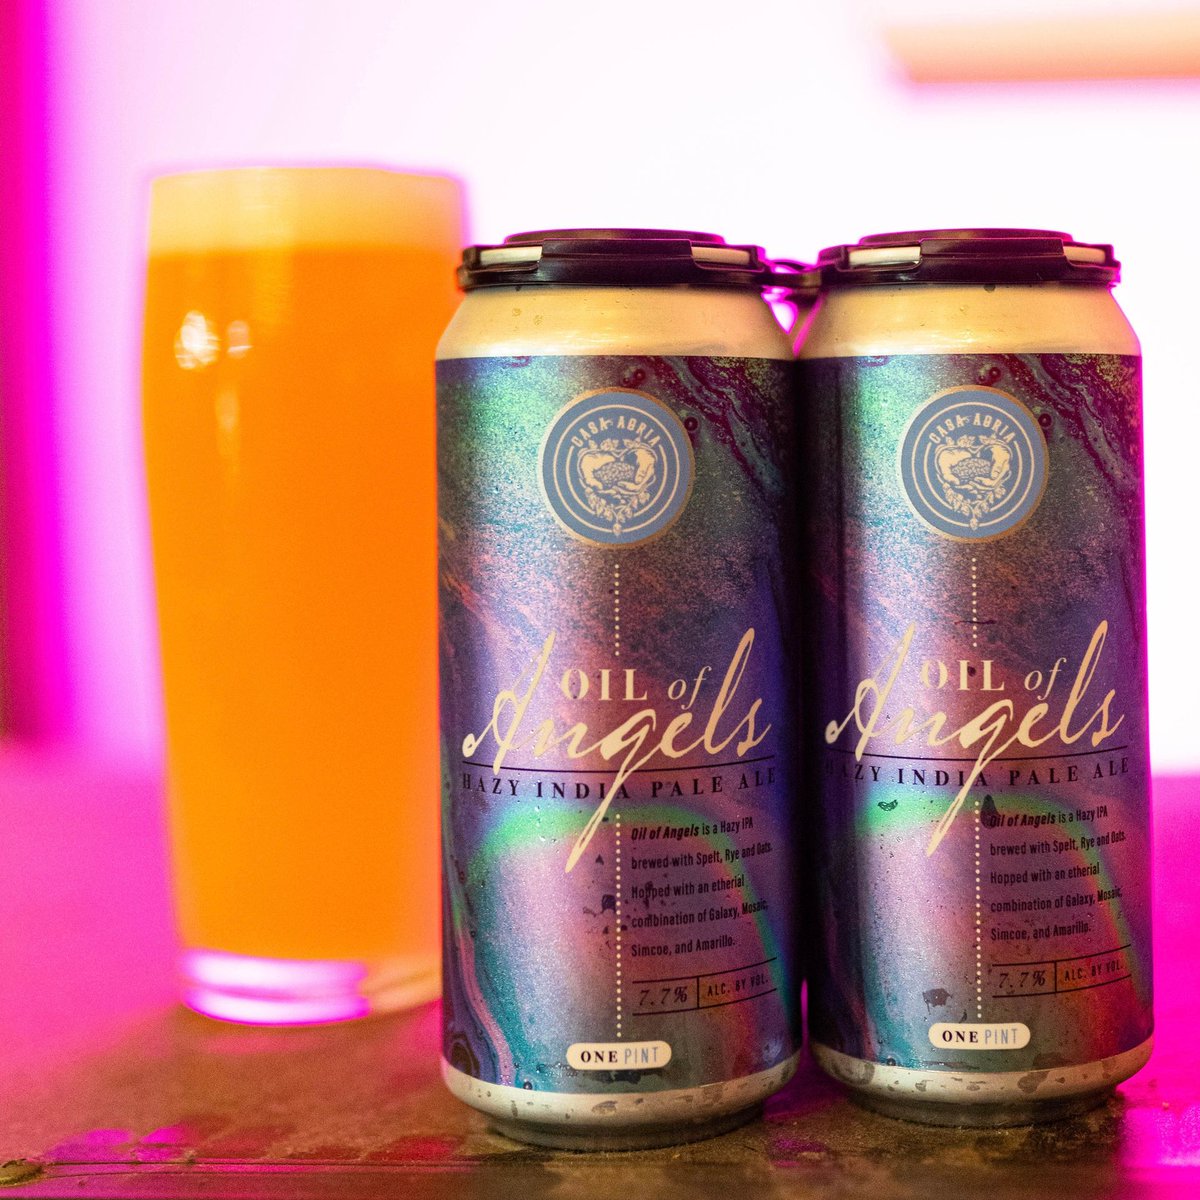 ///THURSDAY•VIBES/// Treat yourself with a Oil of Angles, our Hazy India Pale Ale brewed with Spelt, Rye. and Oats. Hopped with an ethereal combination of Galaxy, Mosaic, Simcoe, and Amarillo, for the big flavors of tropical fruit, peaches, and melon that we just love!